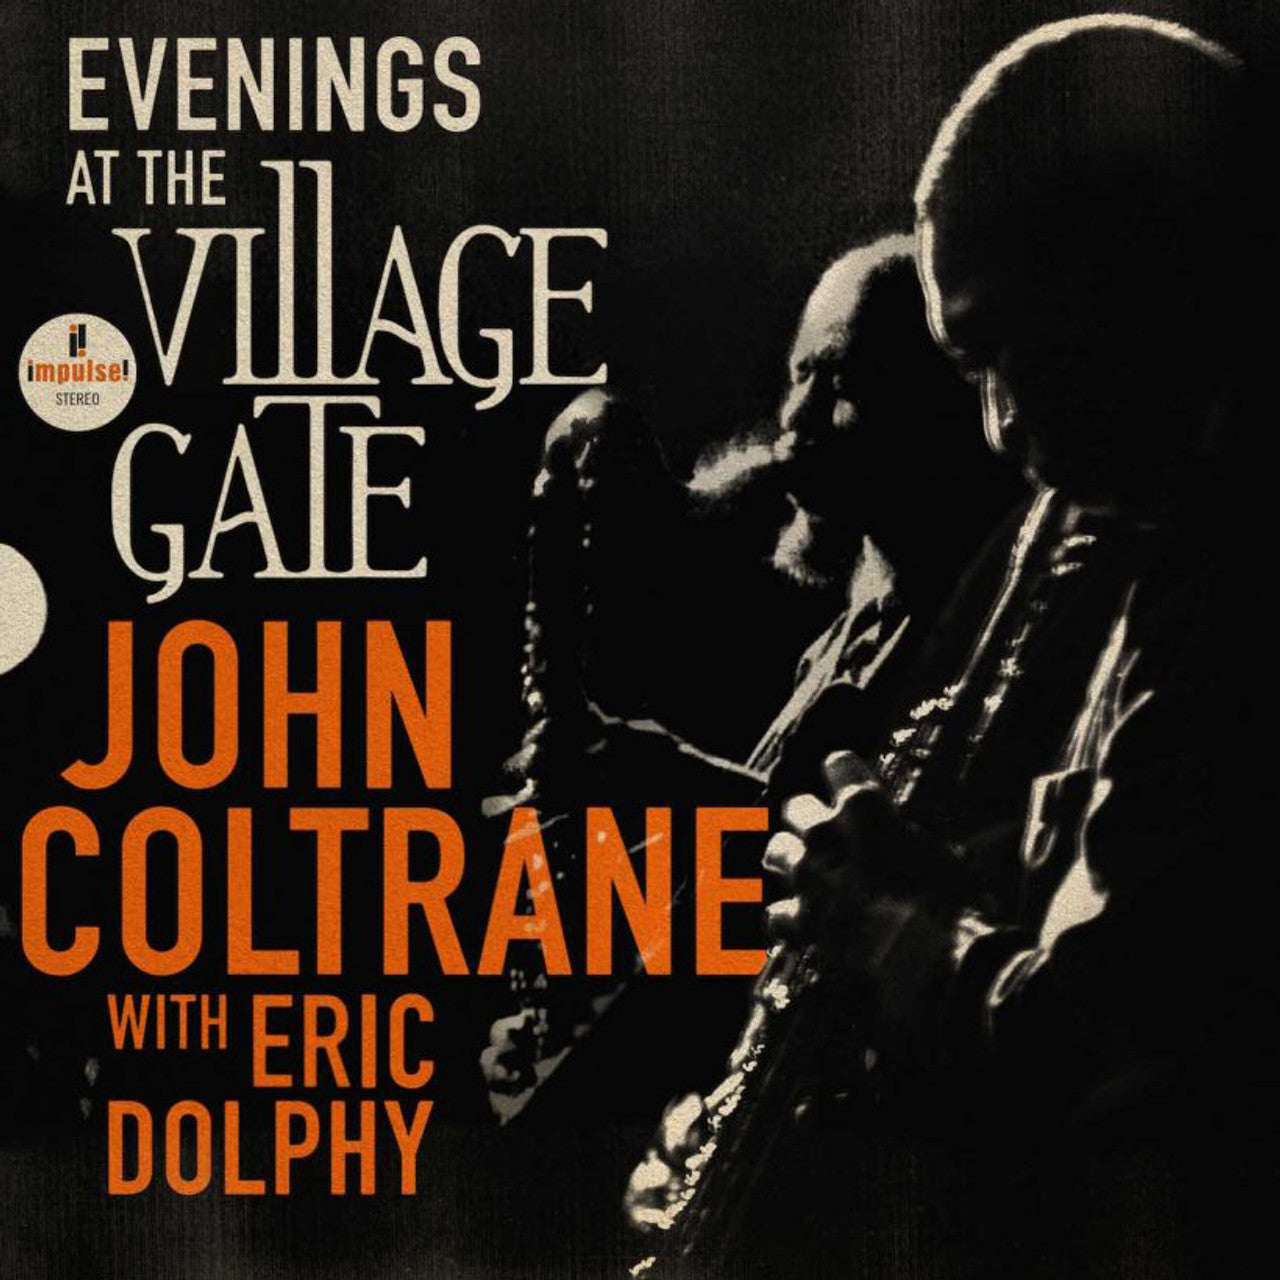 Coltrane, John "Evenings at The Village Gate: John Coltrane with Eric Dolphy" 2LP